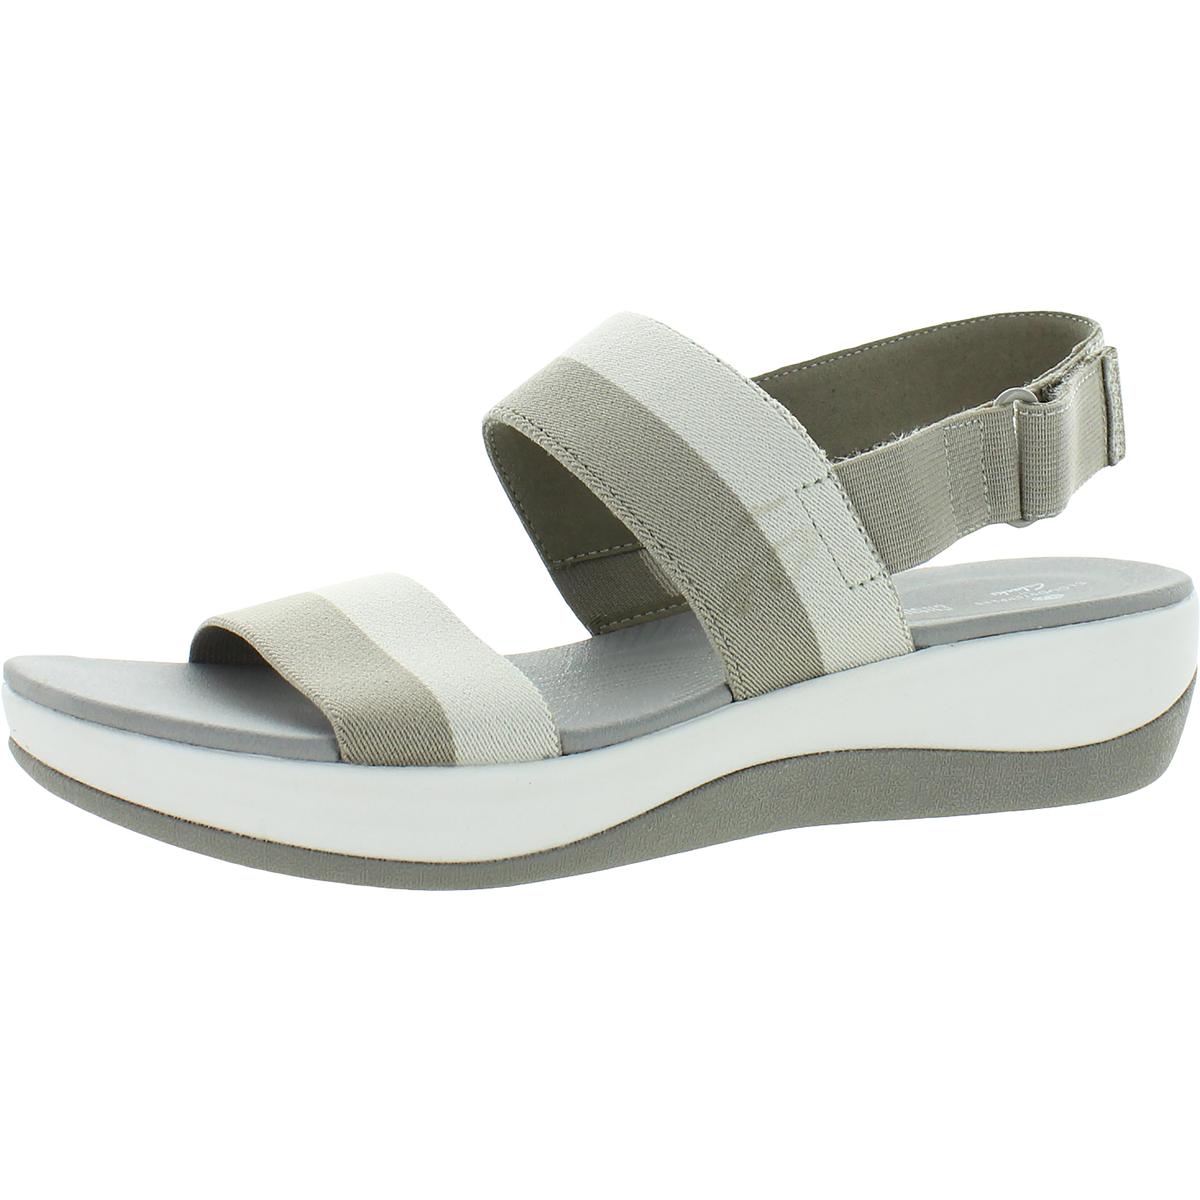 Cloudsteppers by Clarks Womens Arla Jacory Wedge Sandals 6 Medium (B,M ...